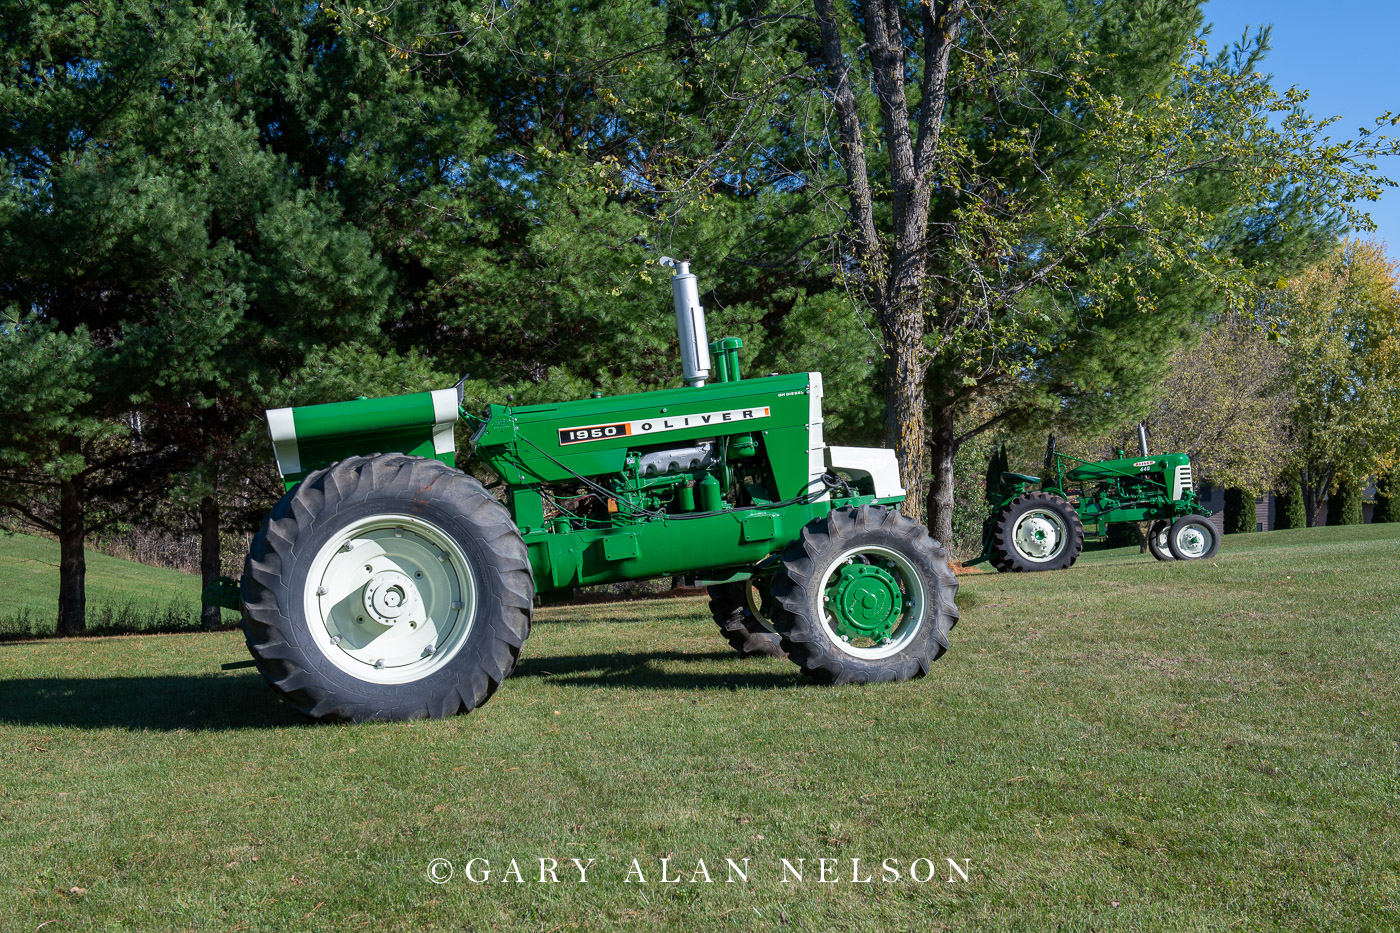 1966 Oliver 1950 with front hydraulic assist, with 1960 Oliver 444 in background.